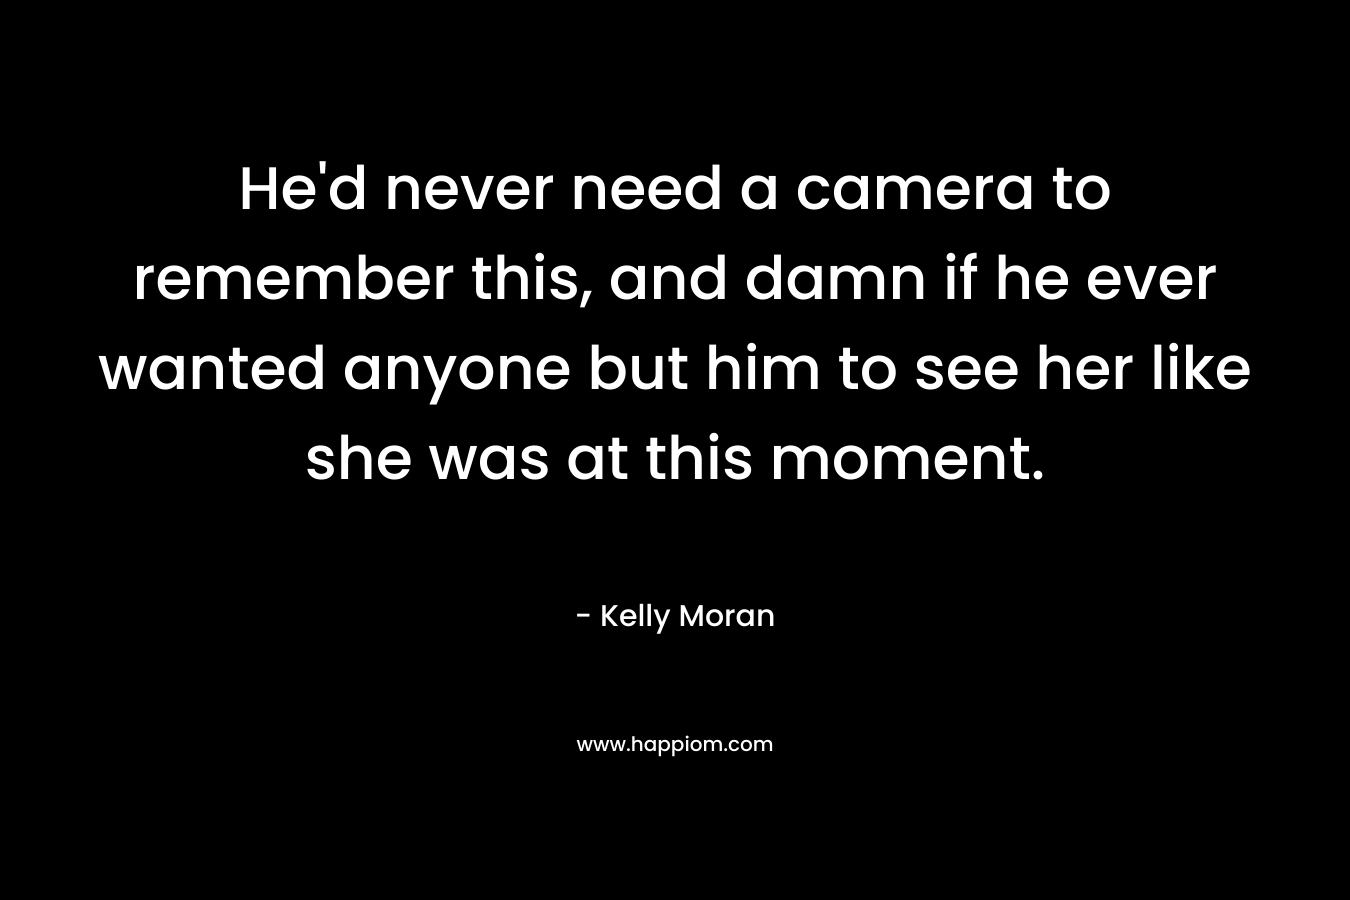 He’d never need a camera to remember this, and damn if he ever wanted anyone but him to see her like she was at this moment. – Kelly Moran